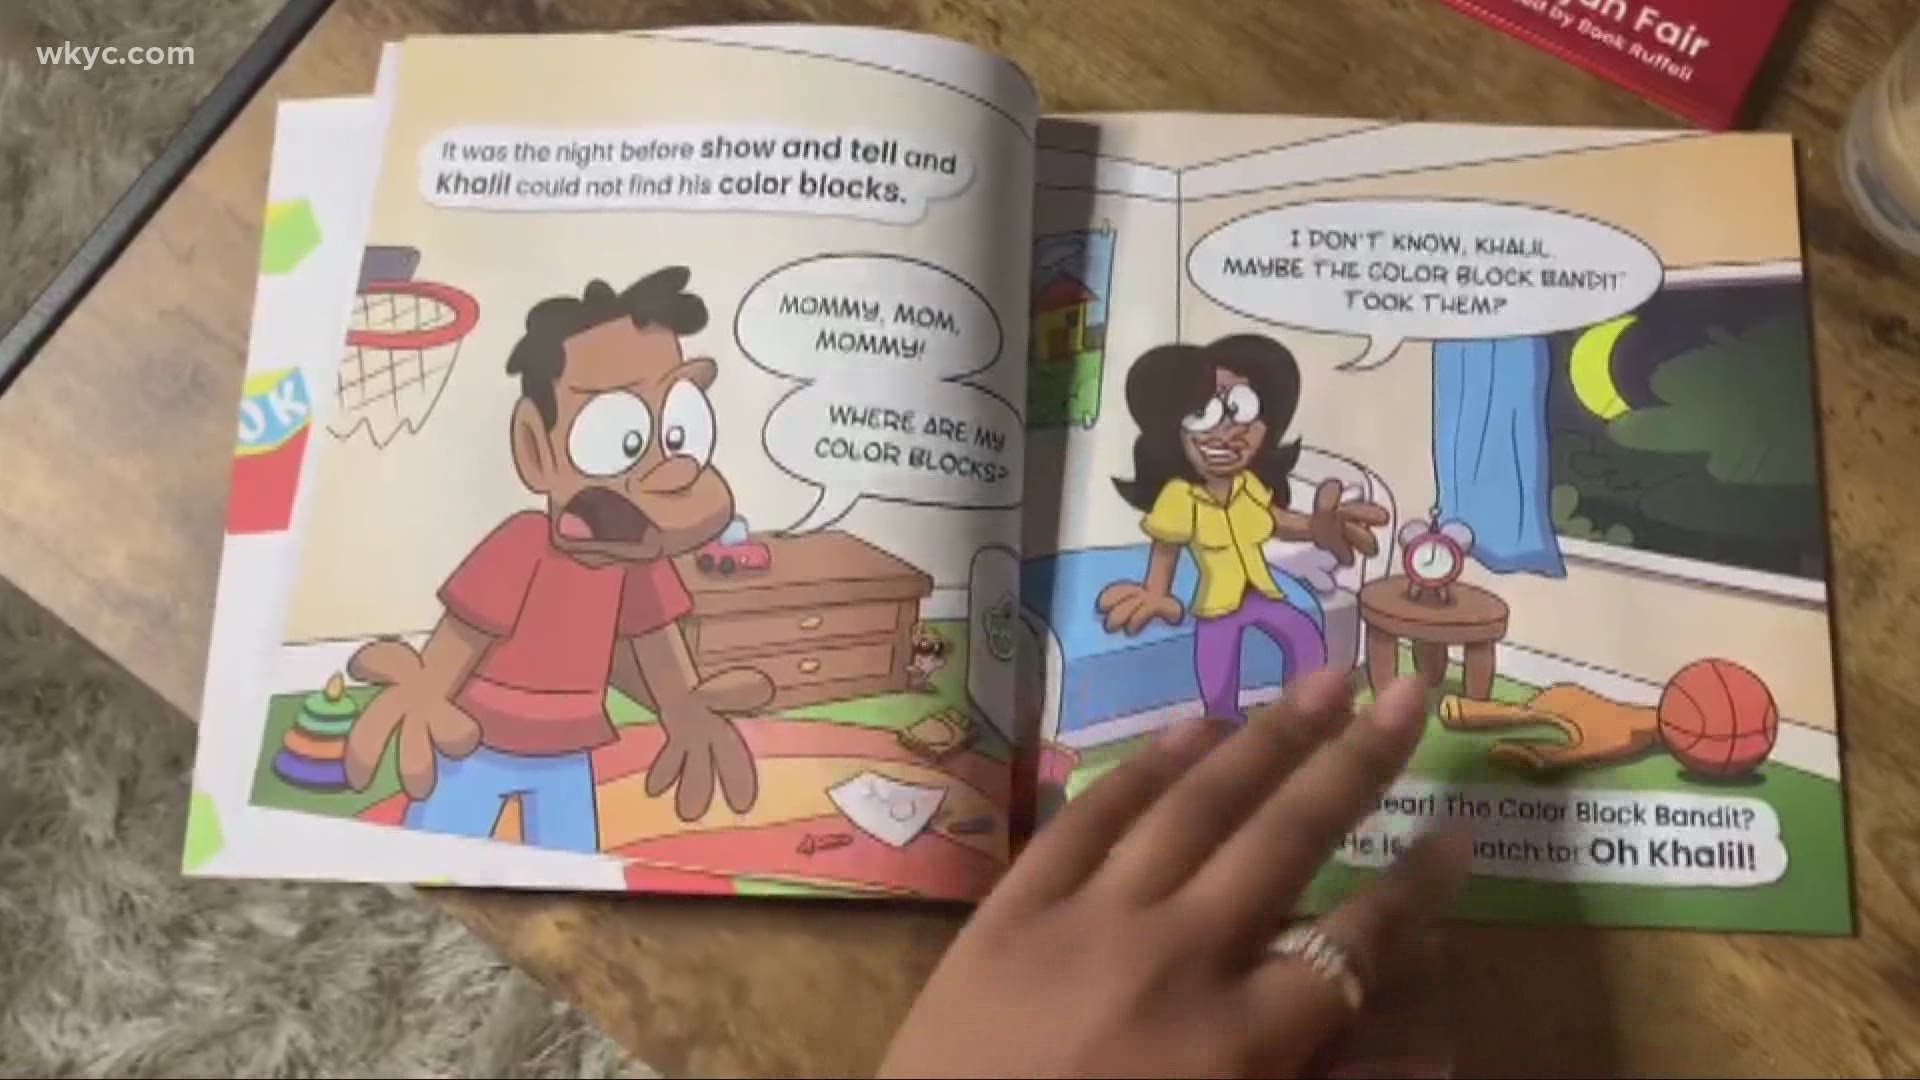 Sept. 15, 2020: Khalil Johnson is becoming a star. After making headlines for solving Rubik's cubes at just 3 years old, he's now starring in his own book.